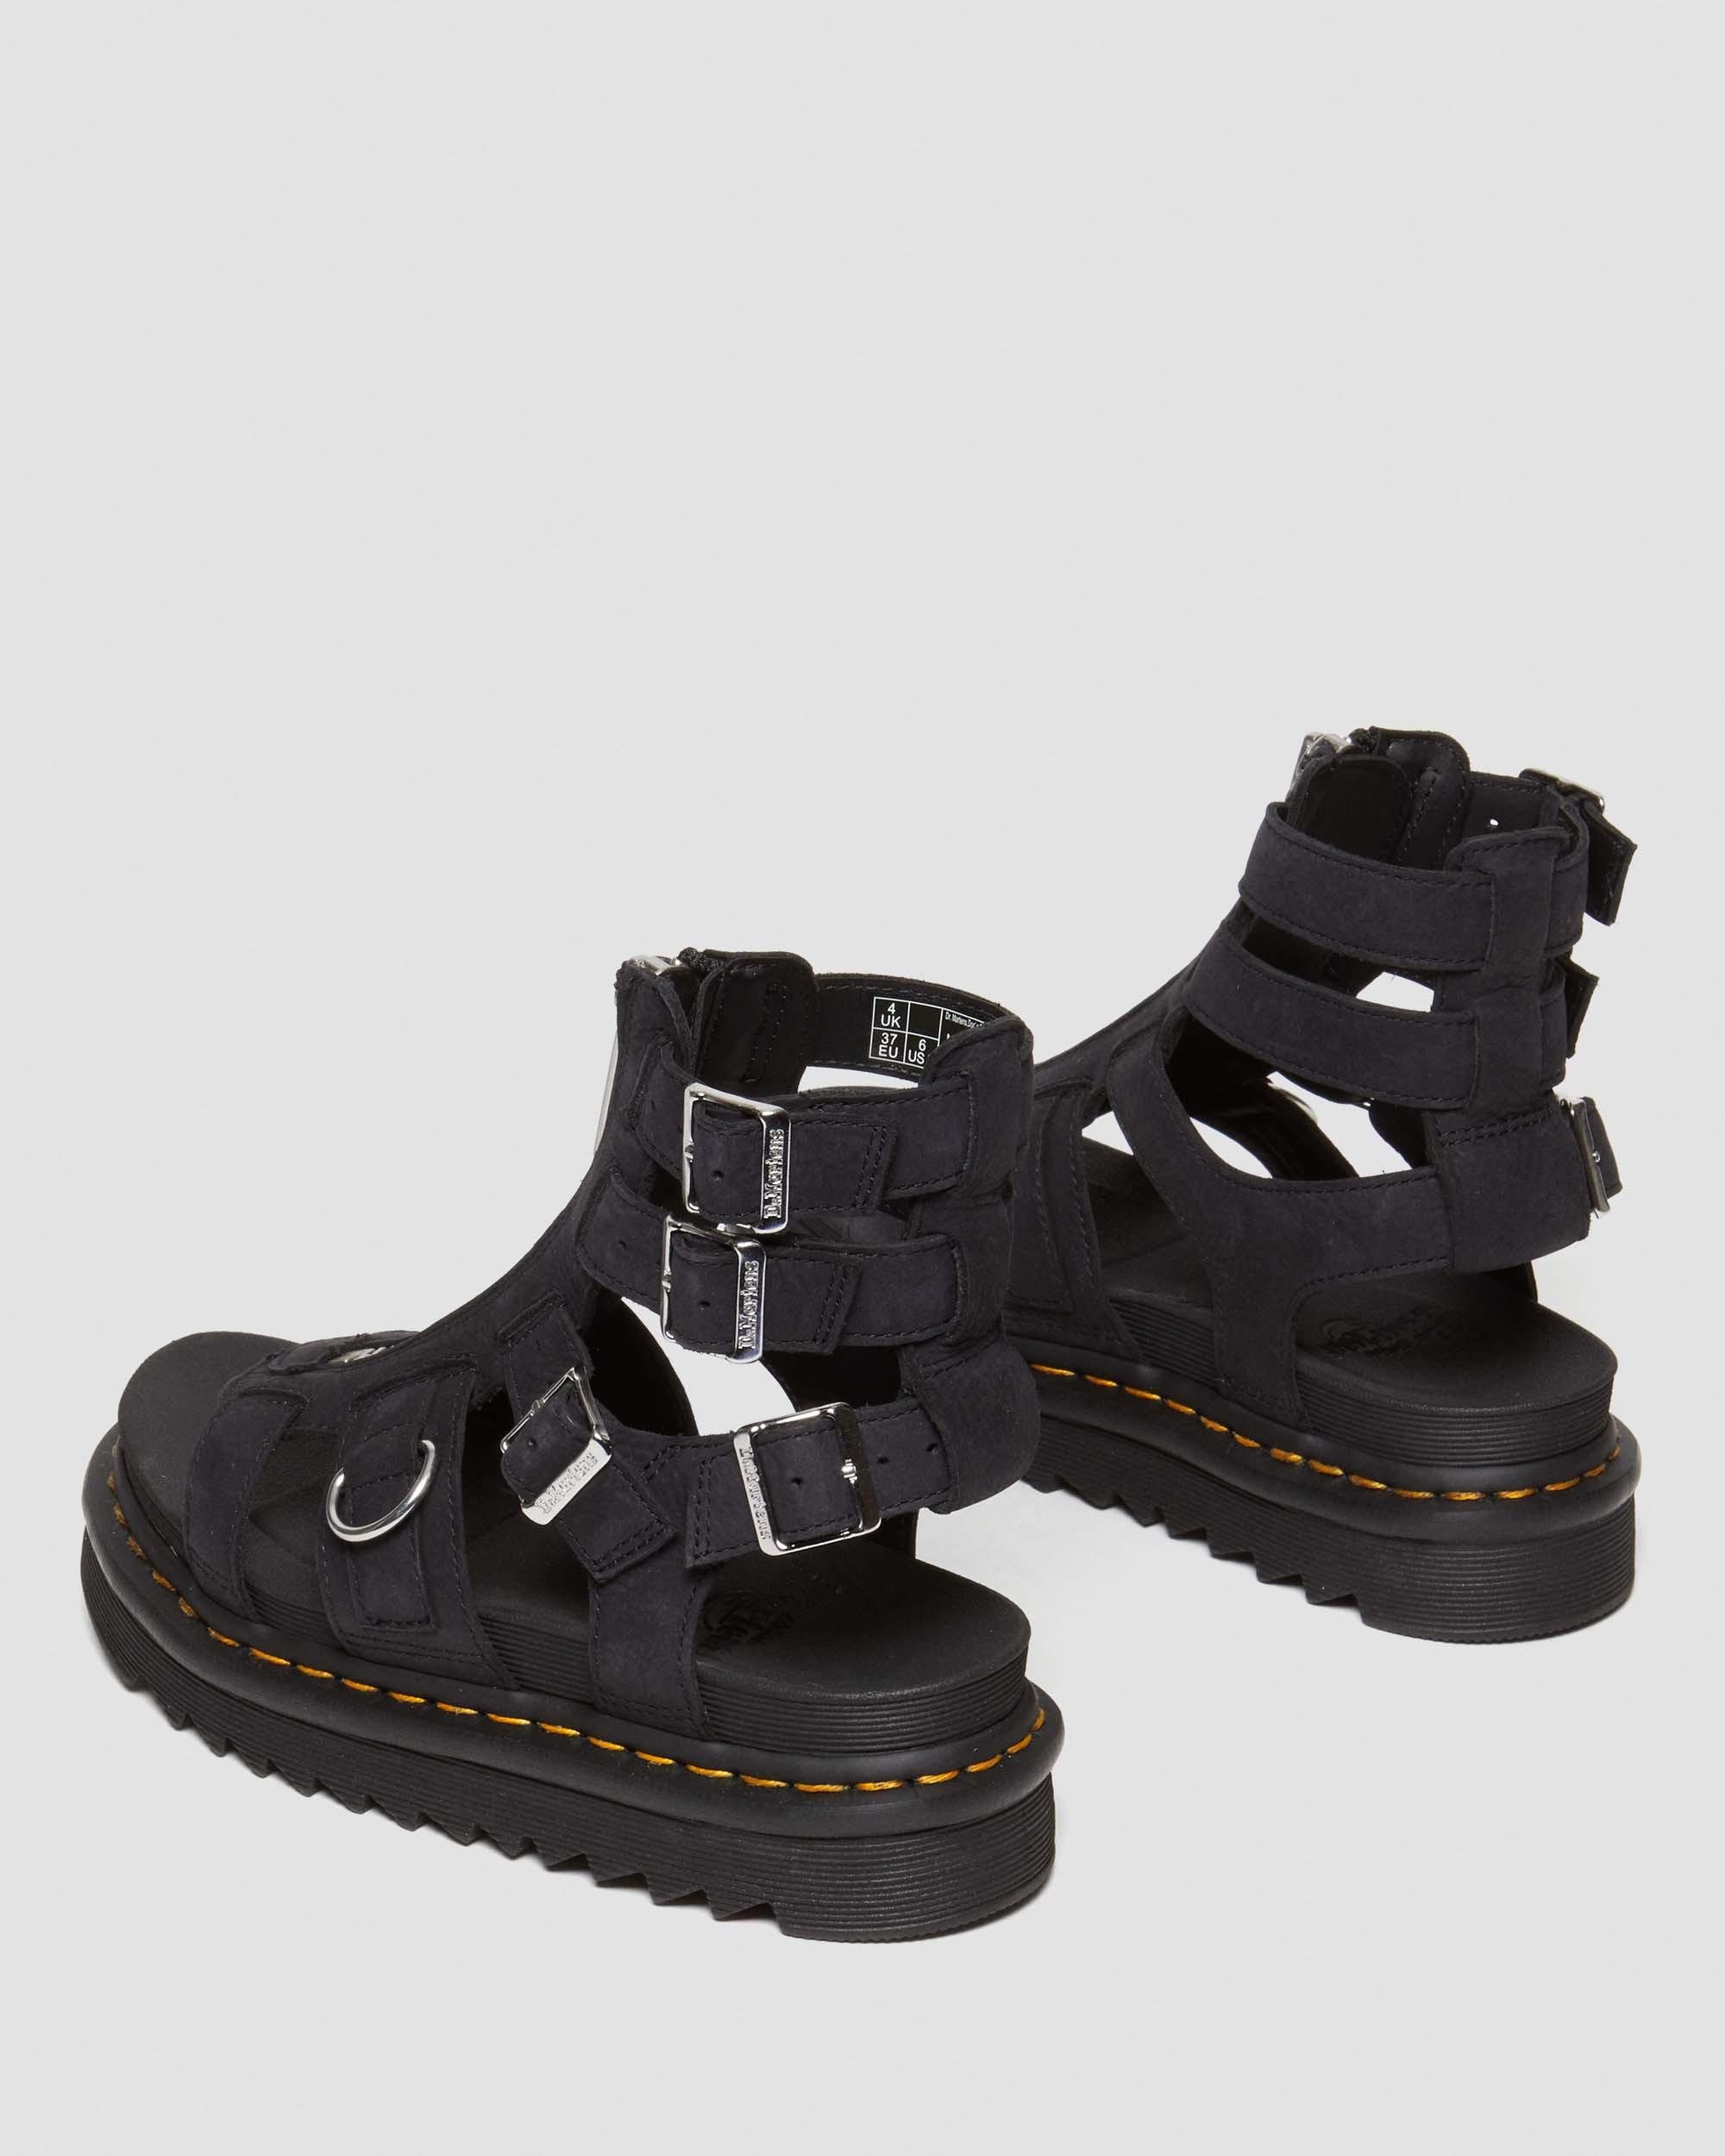 Olson Tumbled Nubuck Leather Gladiator Zip Sandals in Charcoal Grey